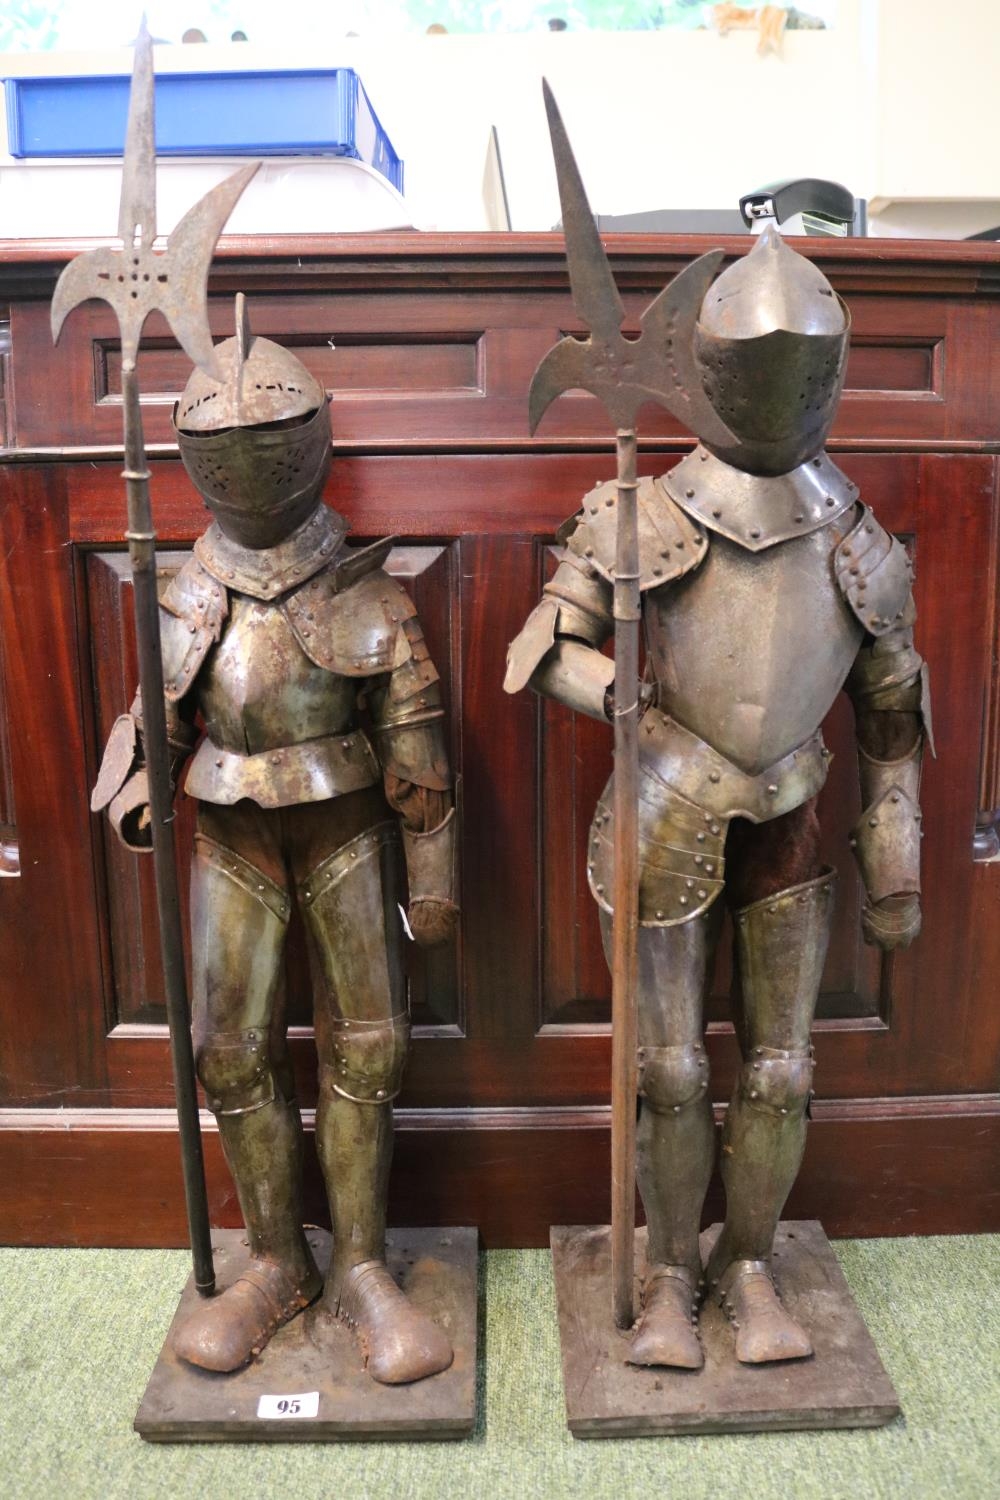 Pair of 19thC Miniature Suits of Jointed Armour mounted on wooden base holding Pikes. - Image 2 of 2